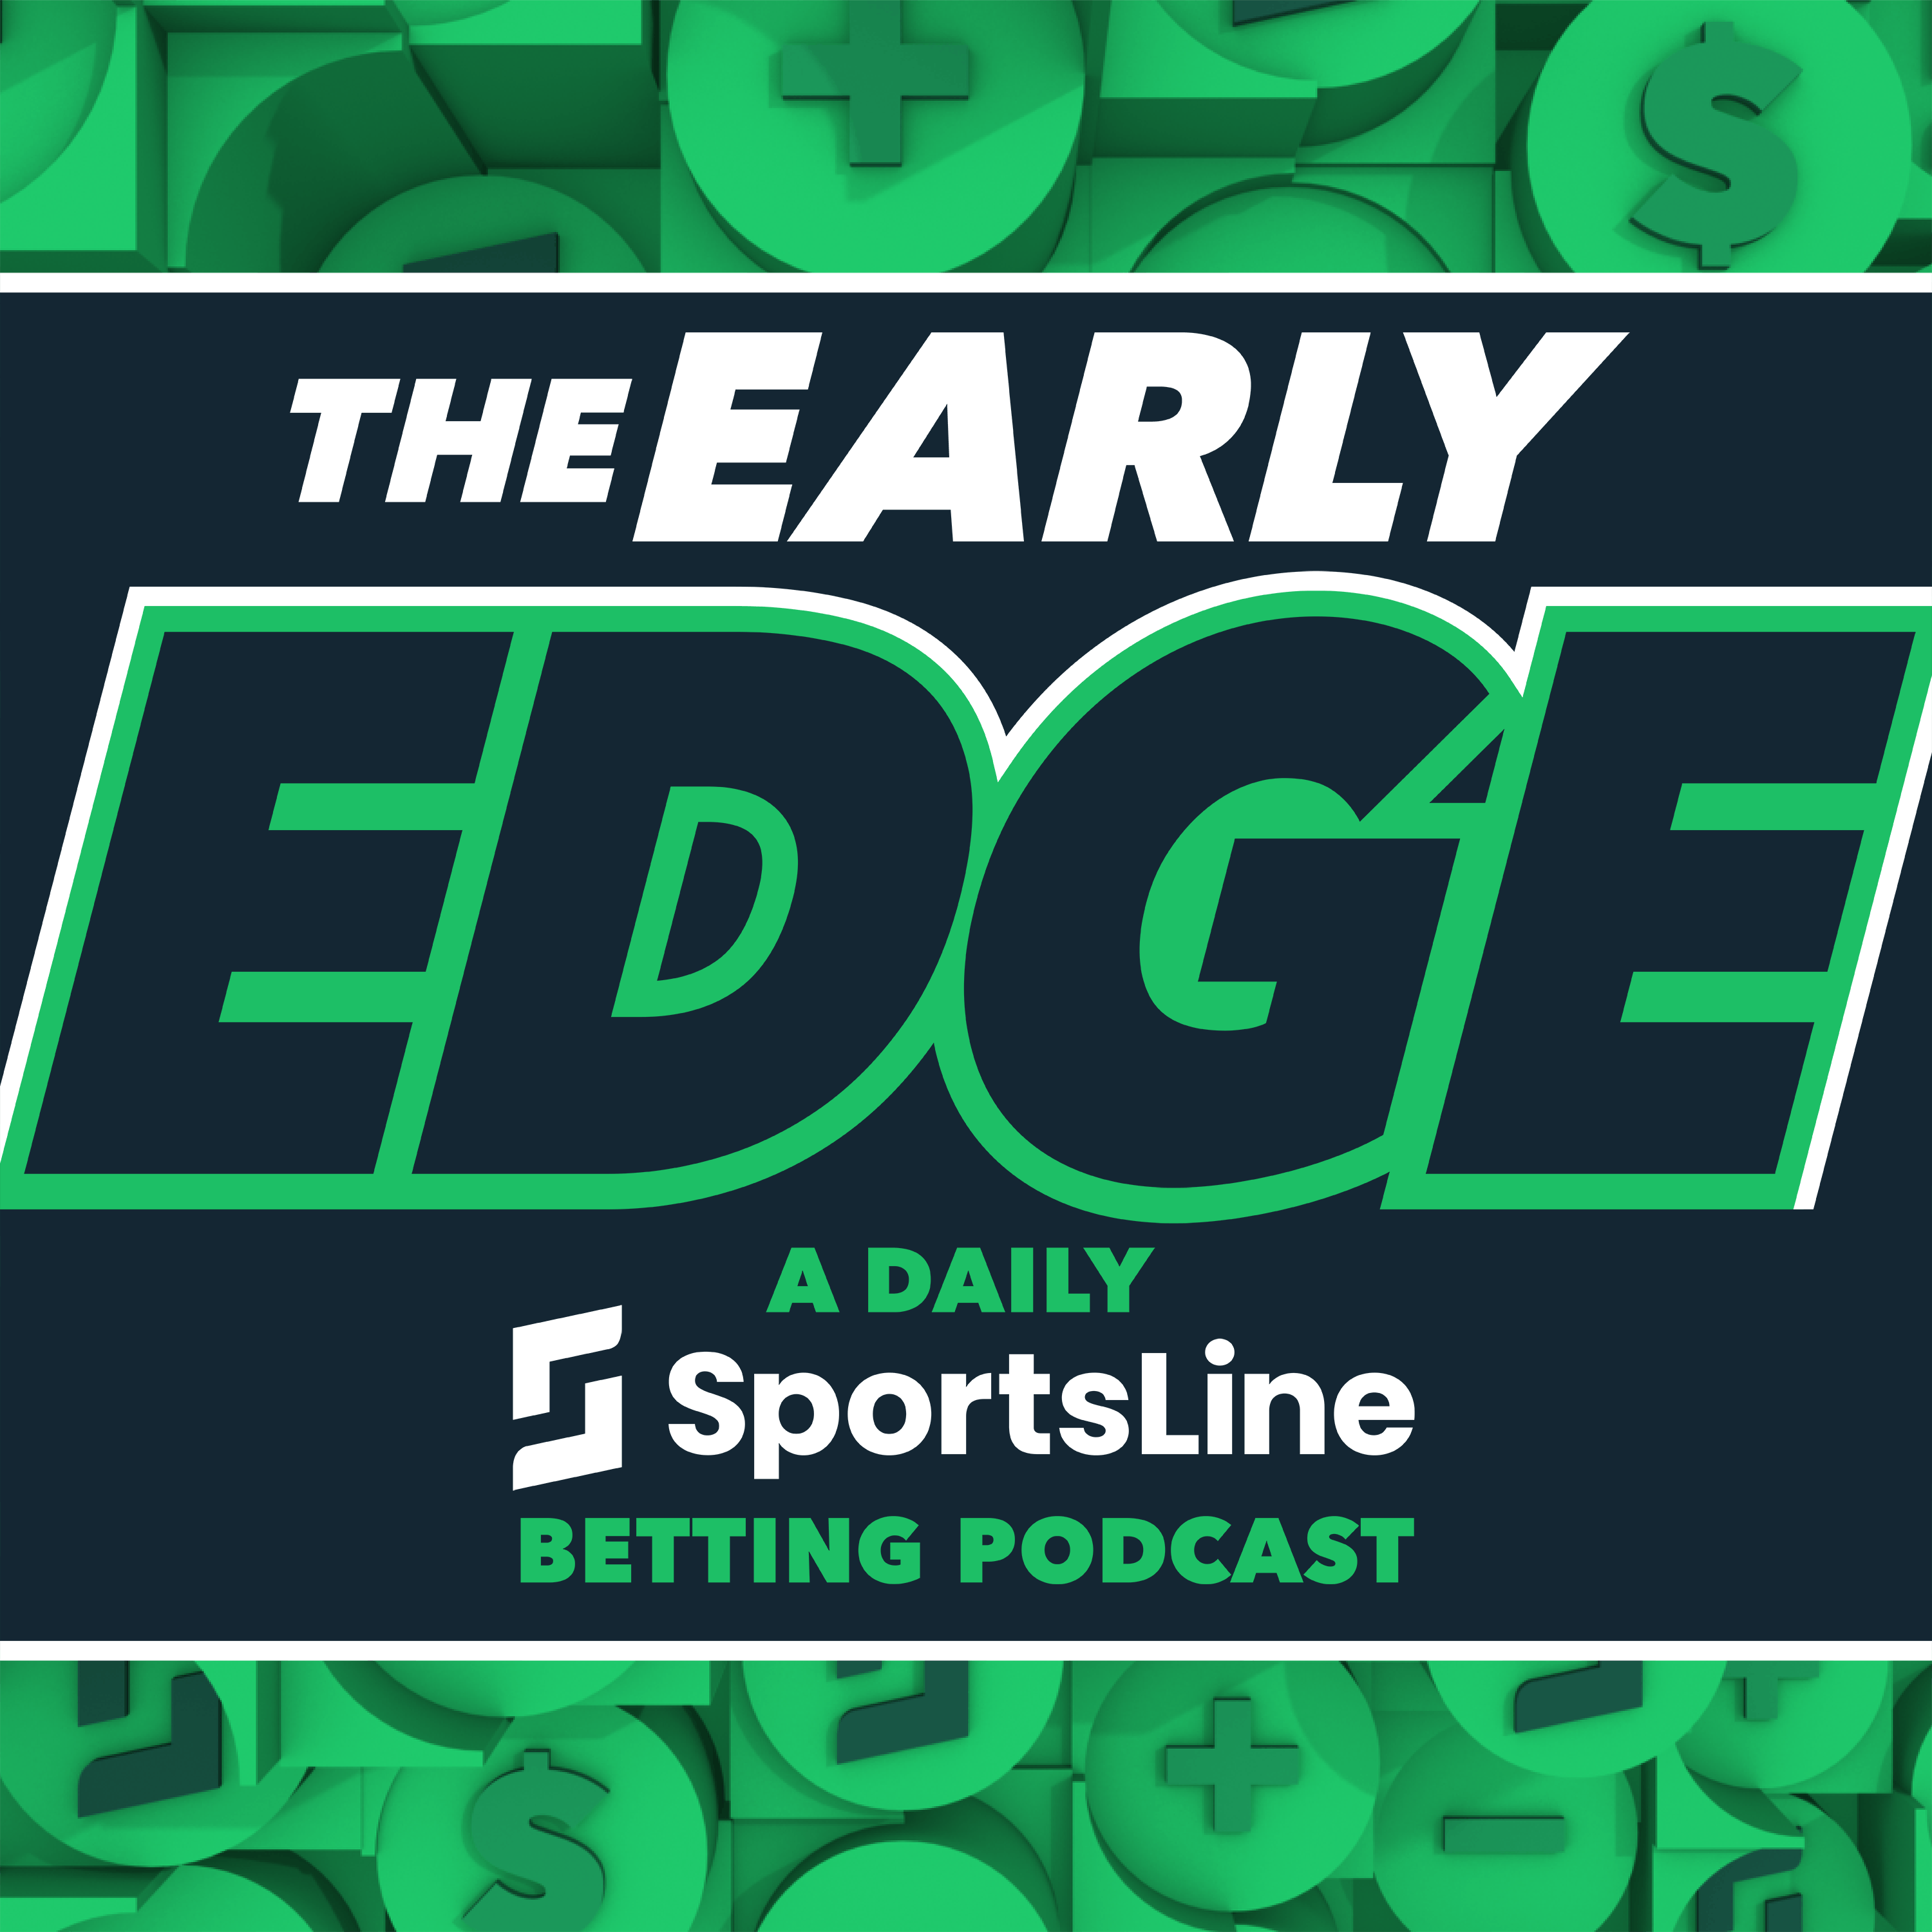 NFL Week 1 Preview: Picks, Predictions and Preview | The Early Edge